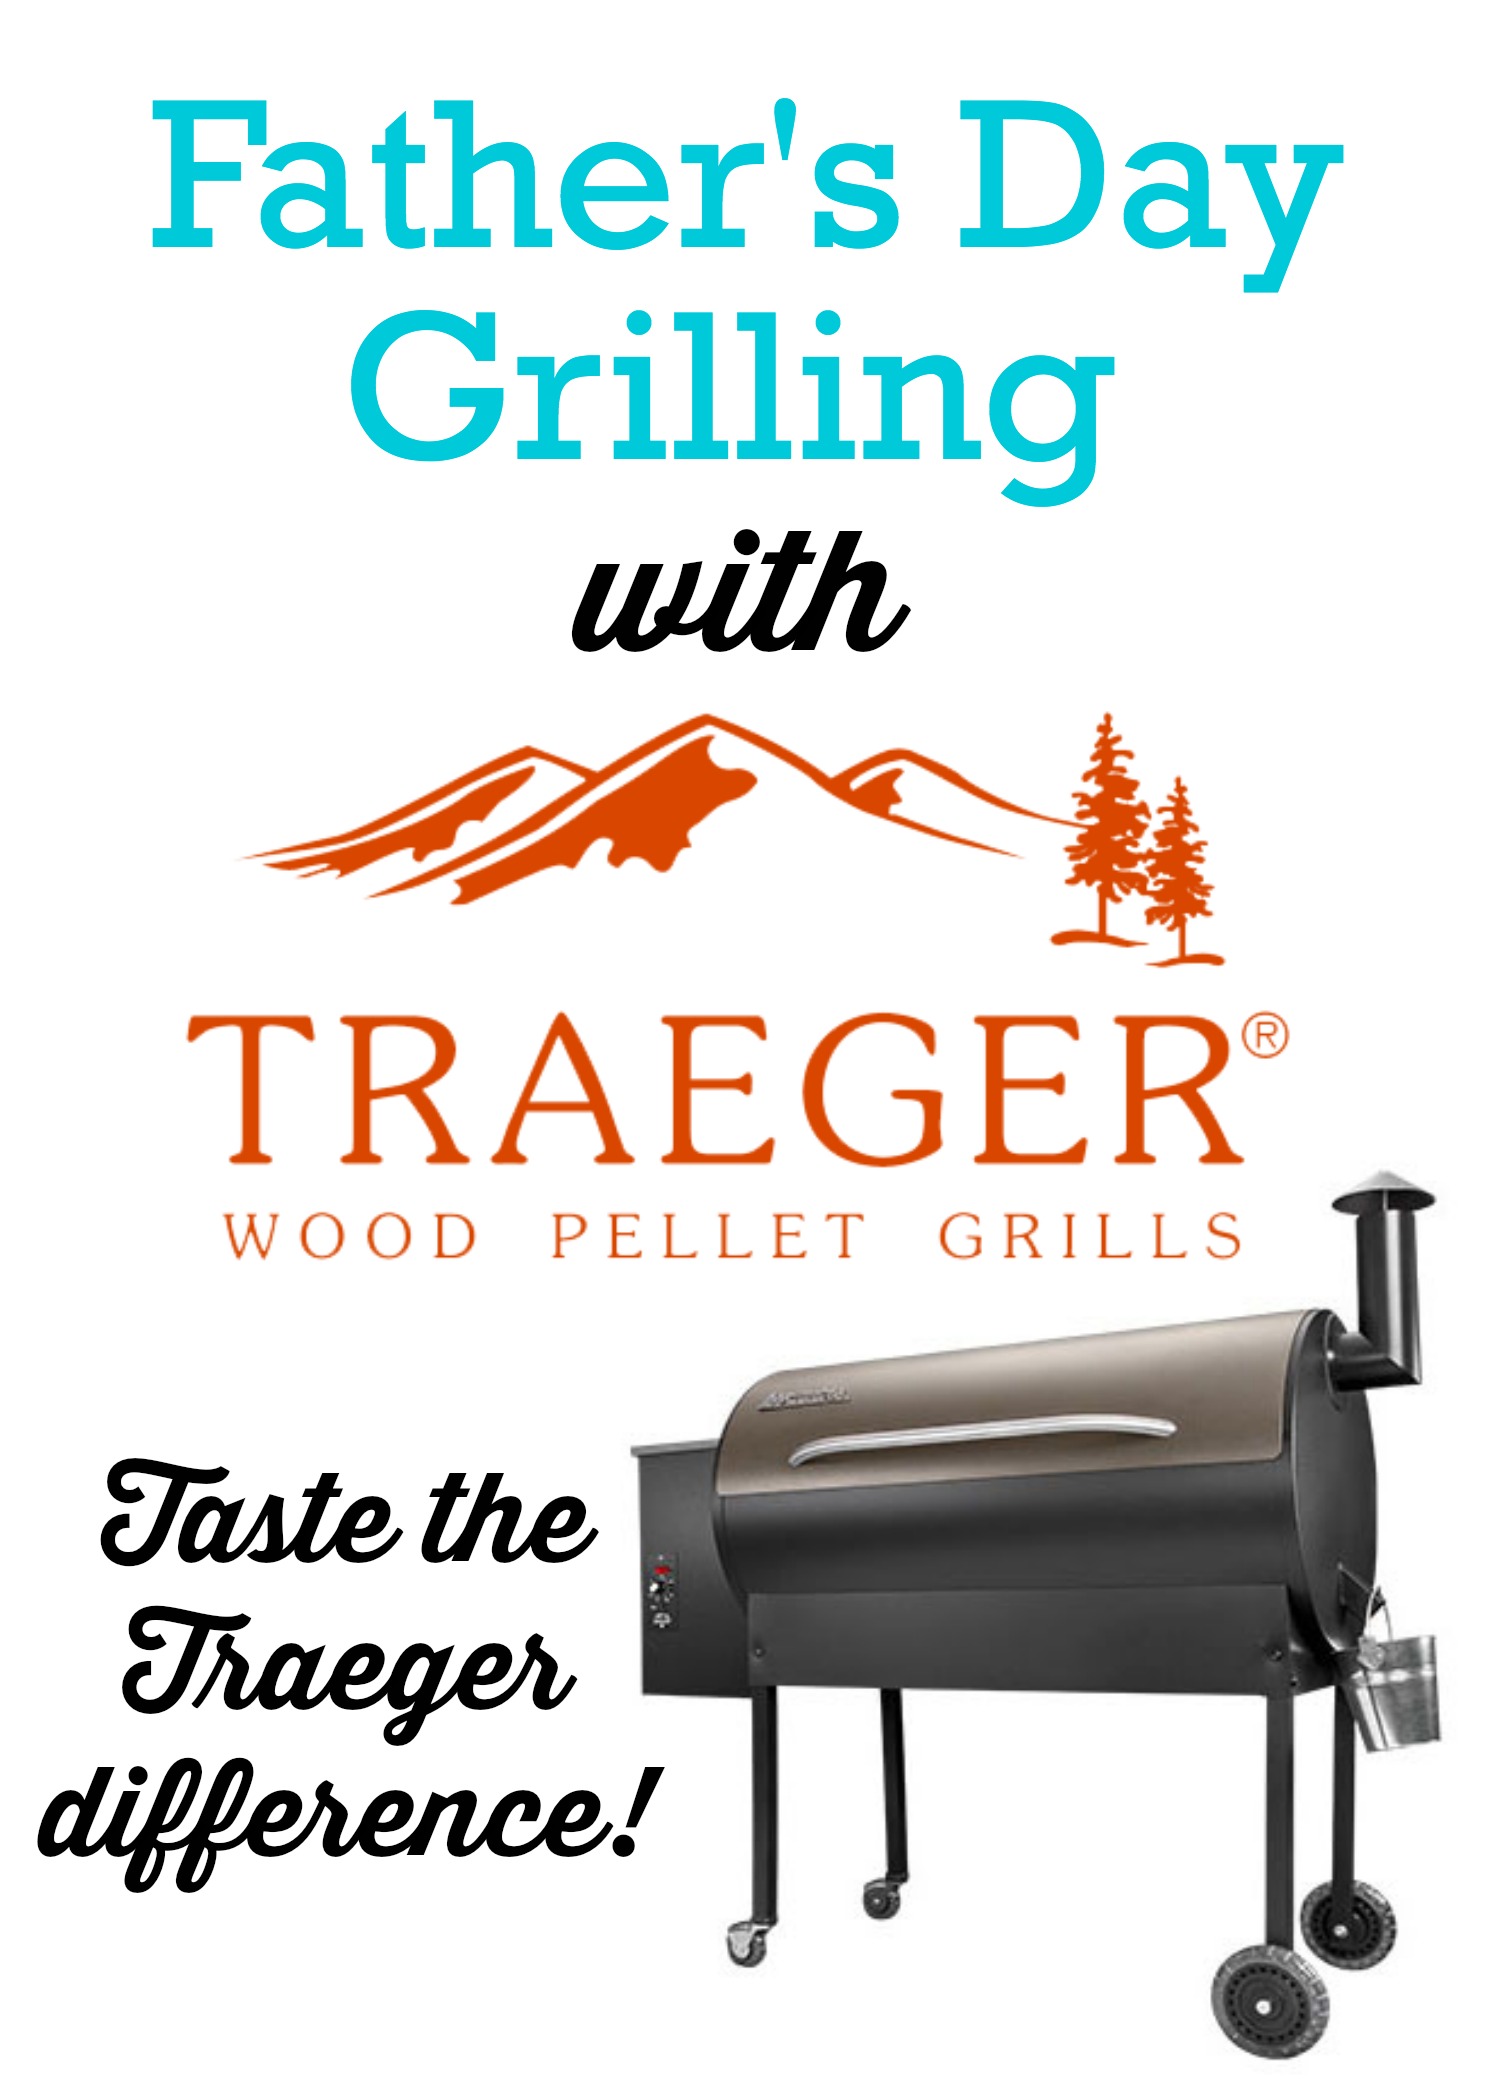 Father’s Day Grilling with Traeger Wood Pellet Grills